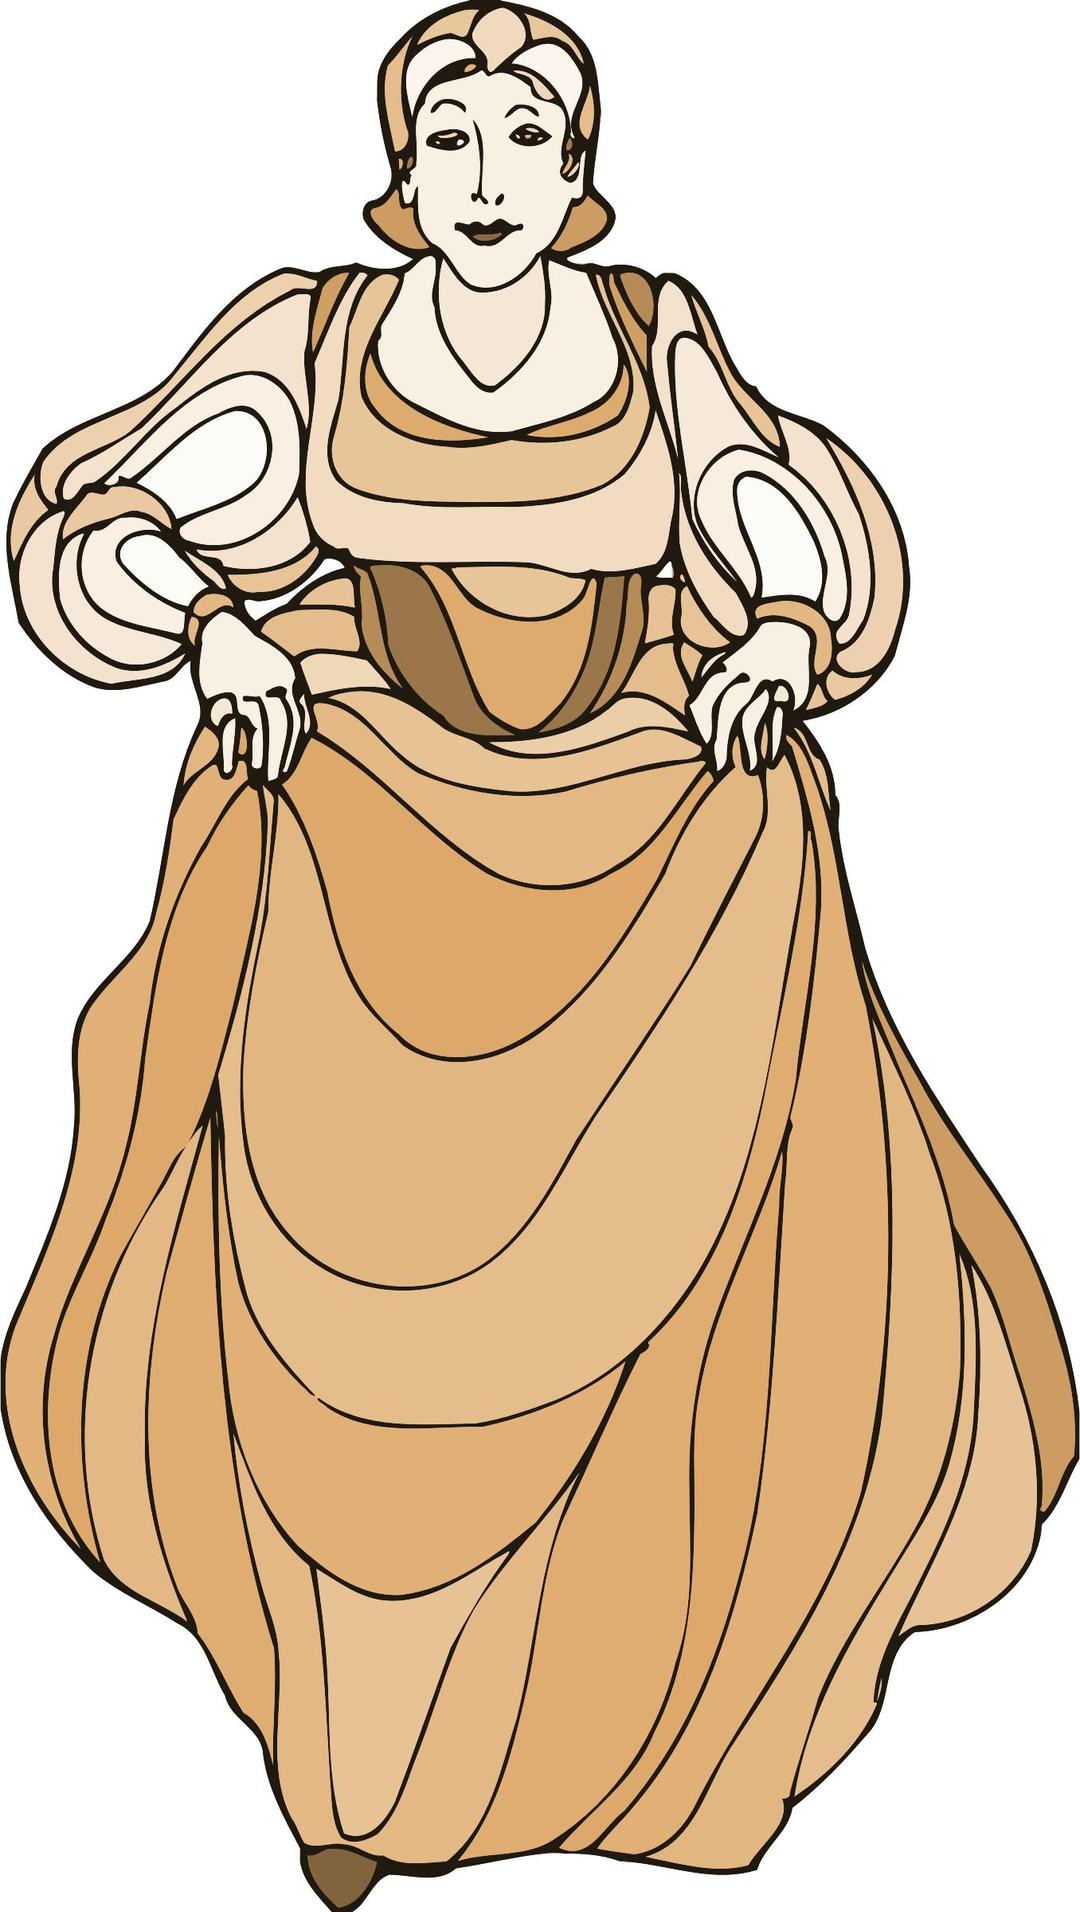 Shakespeare characters - Maria png transparent